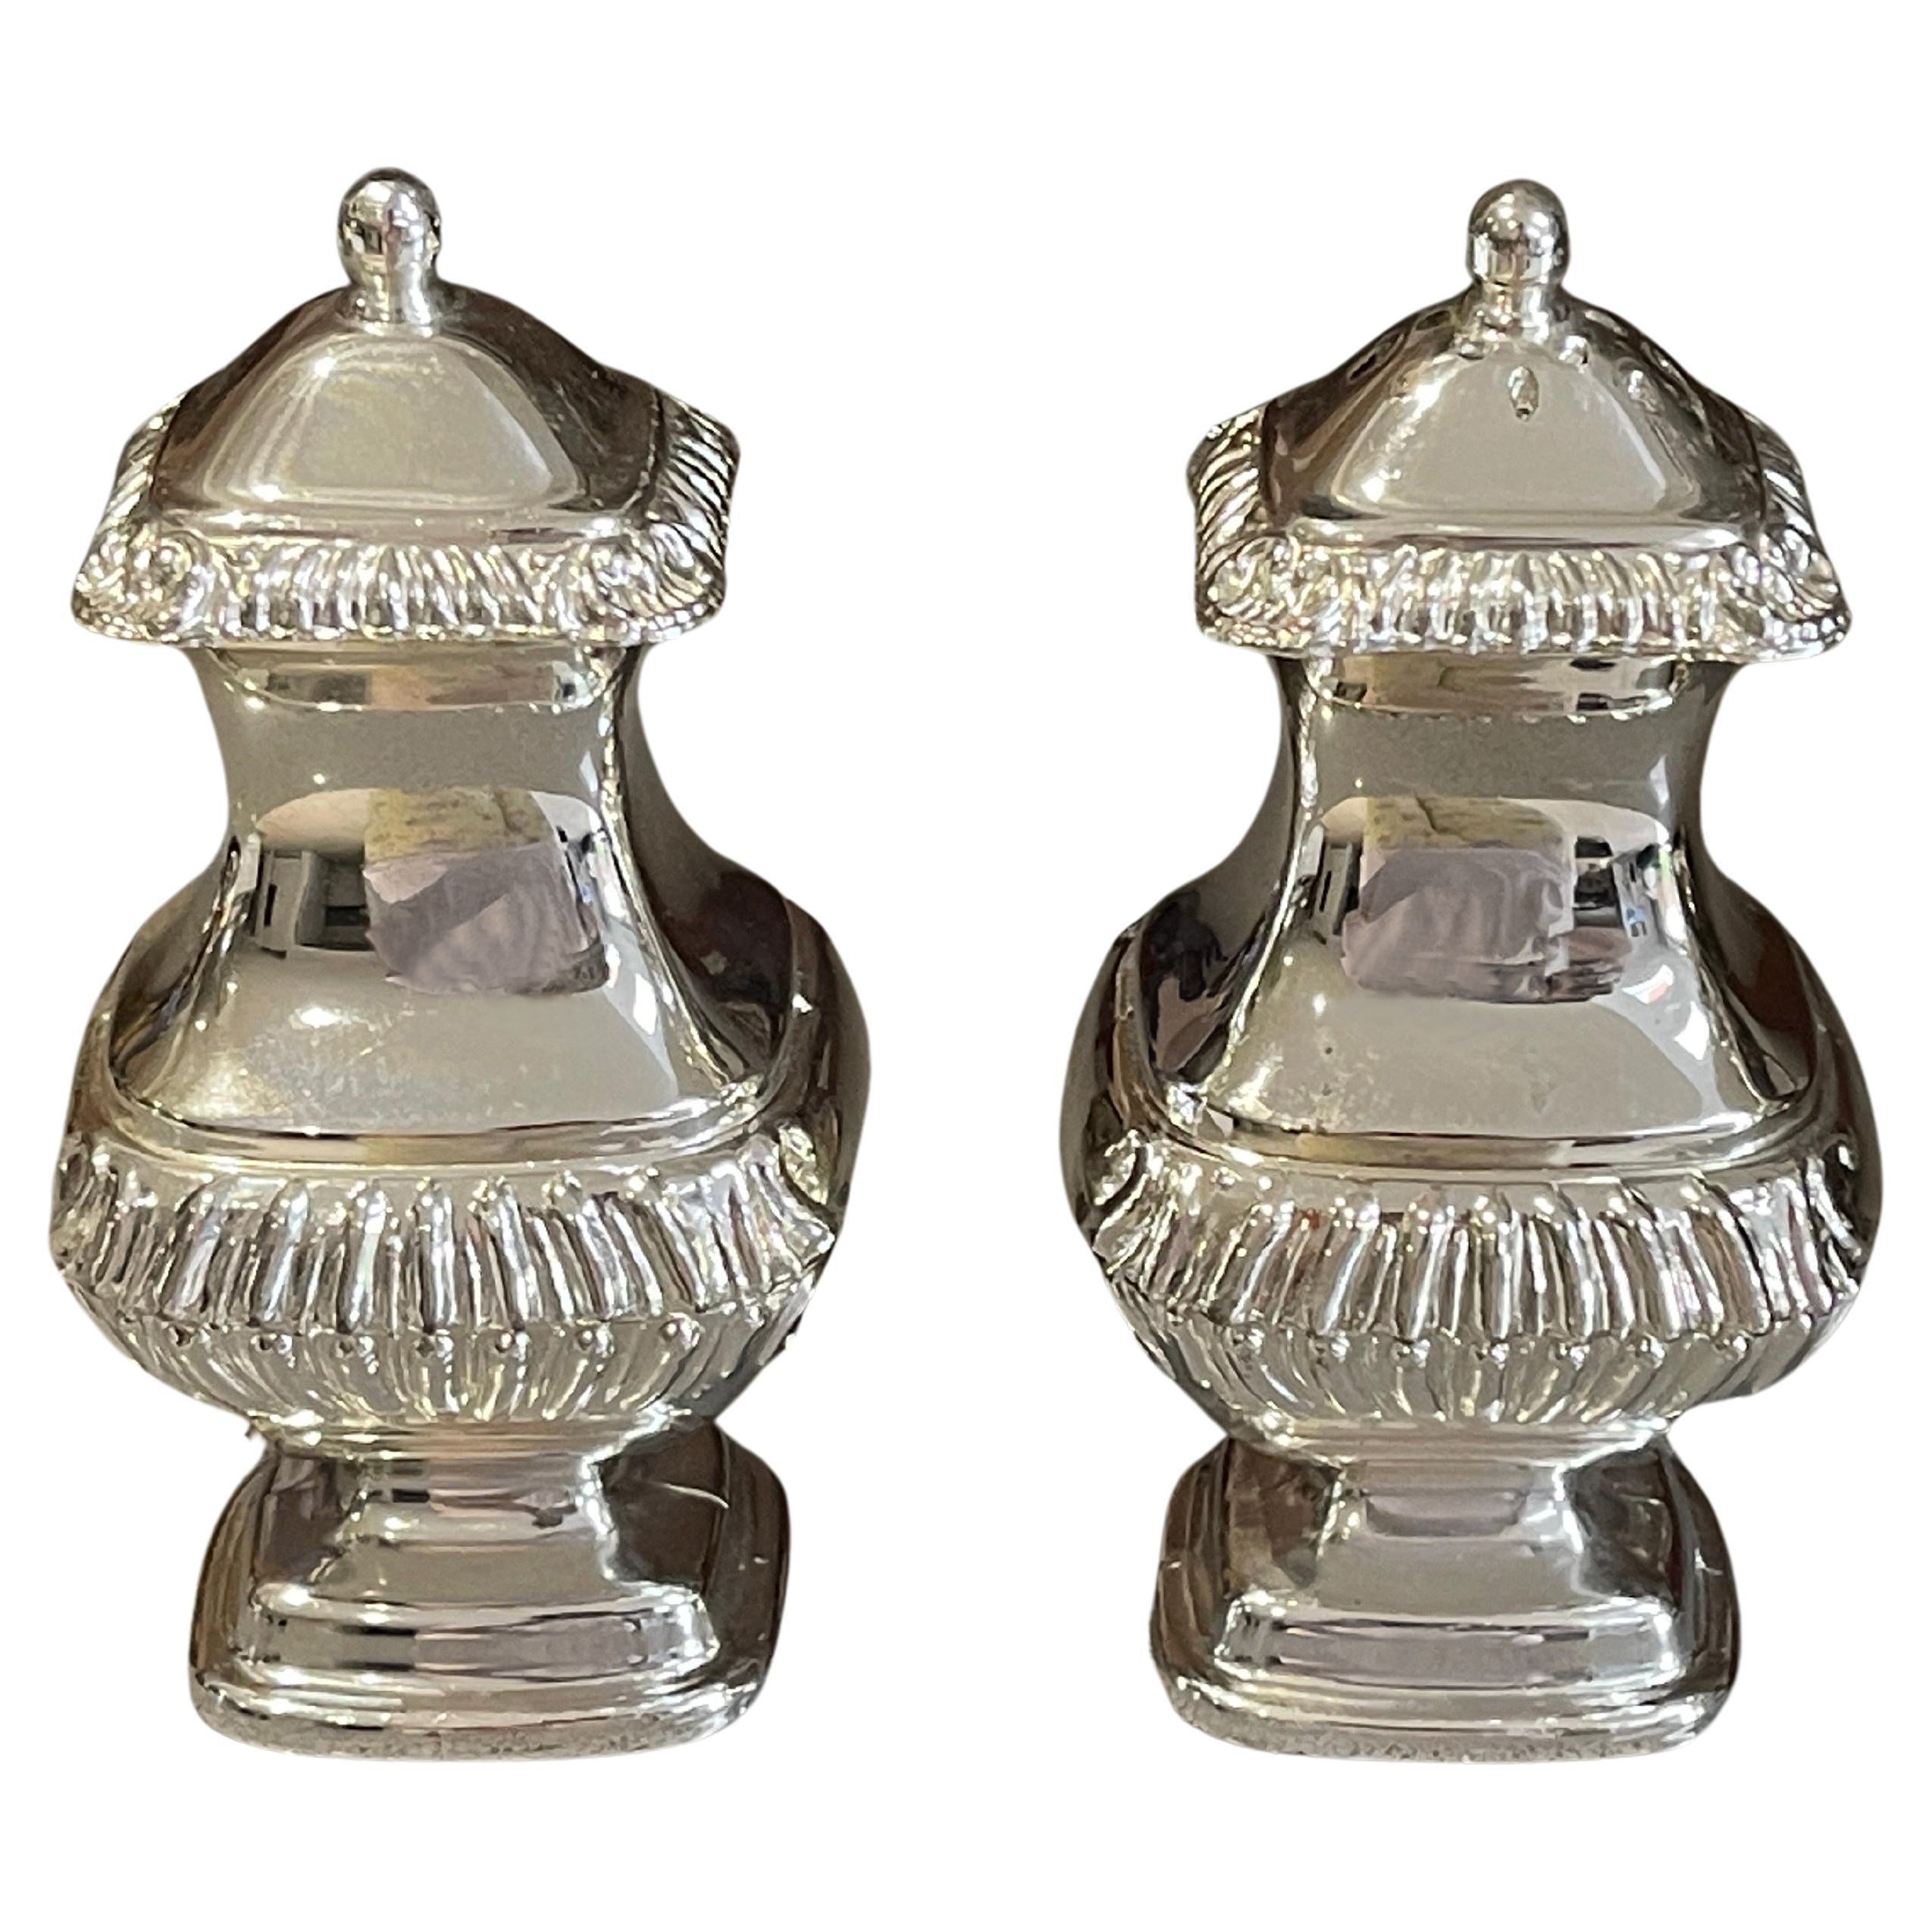 A Silver Silver Salt Shaker Style Rococo, Pair of Decorative Pepper Shaker Sale 